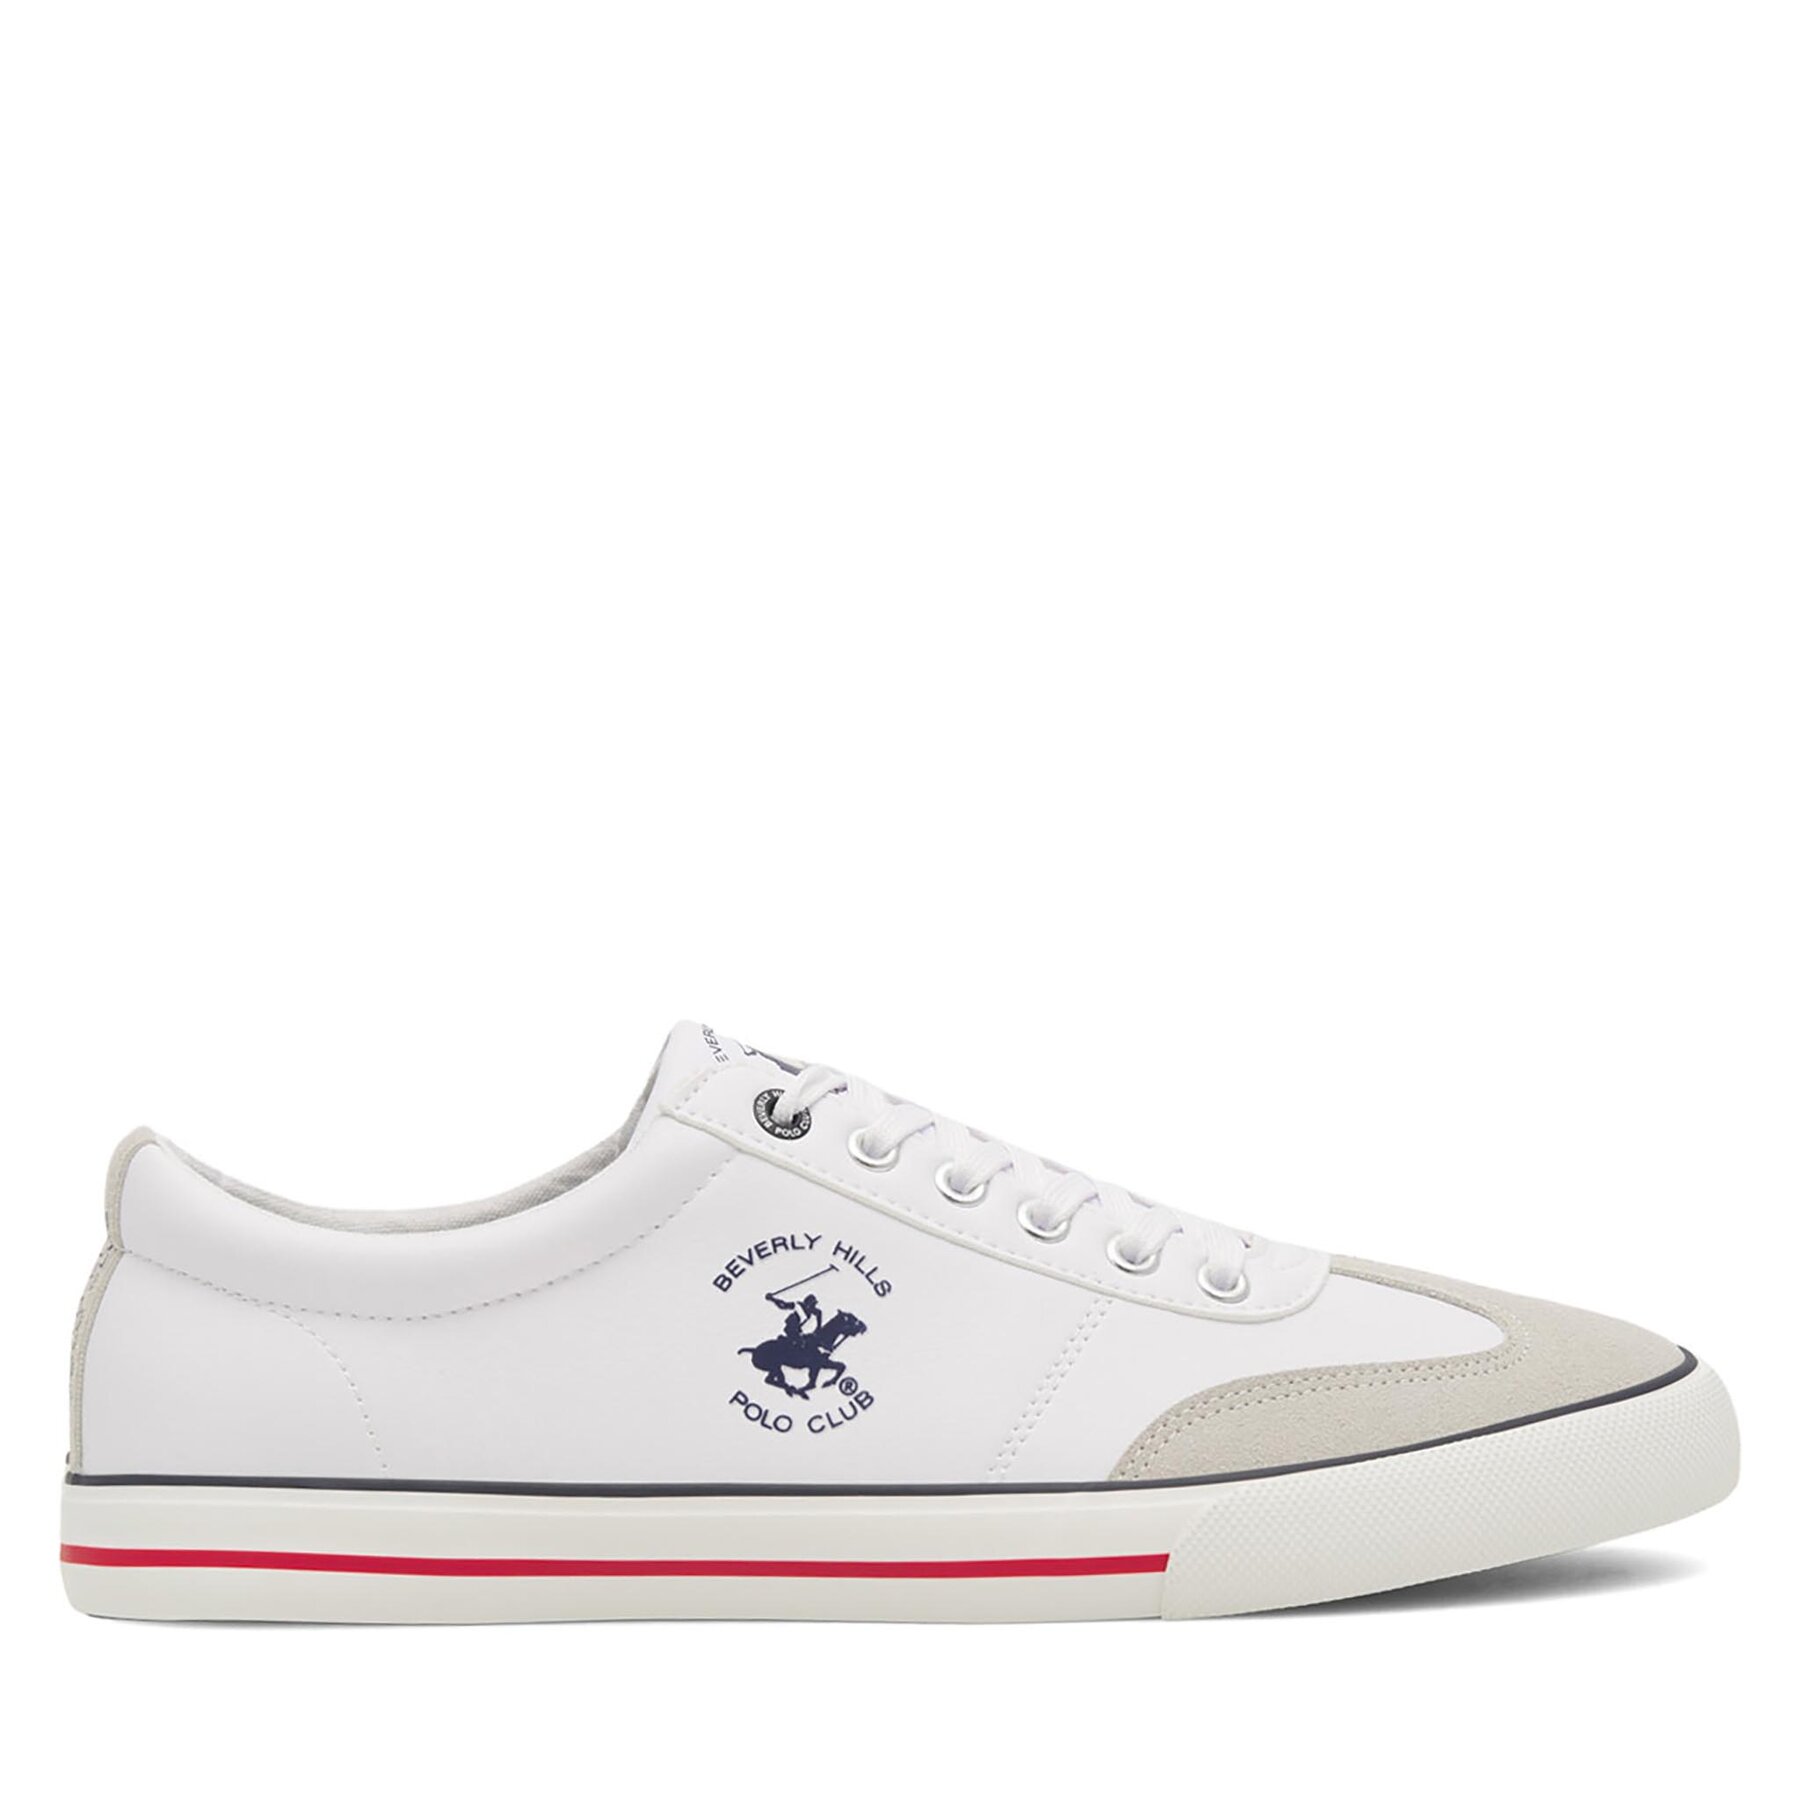 Sneakers aus Stoff Beverly Hills Polo Club M-24MVS5006 Weiß von Beverly Hills Polo Club